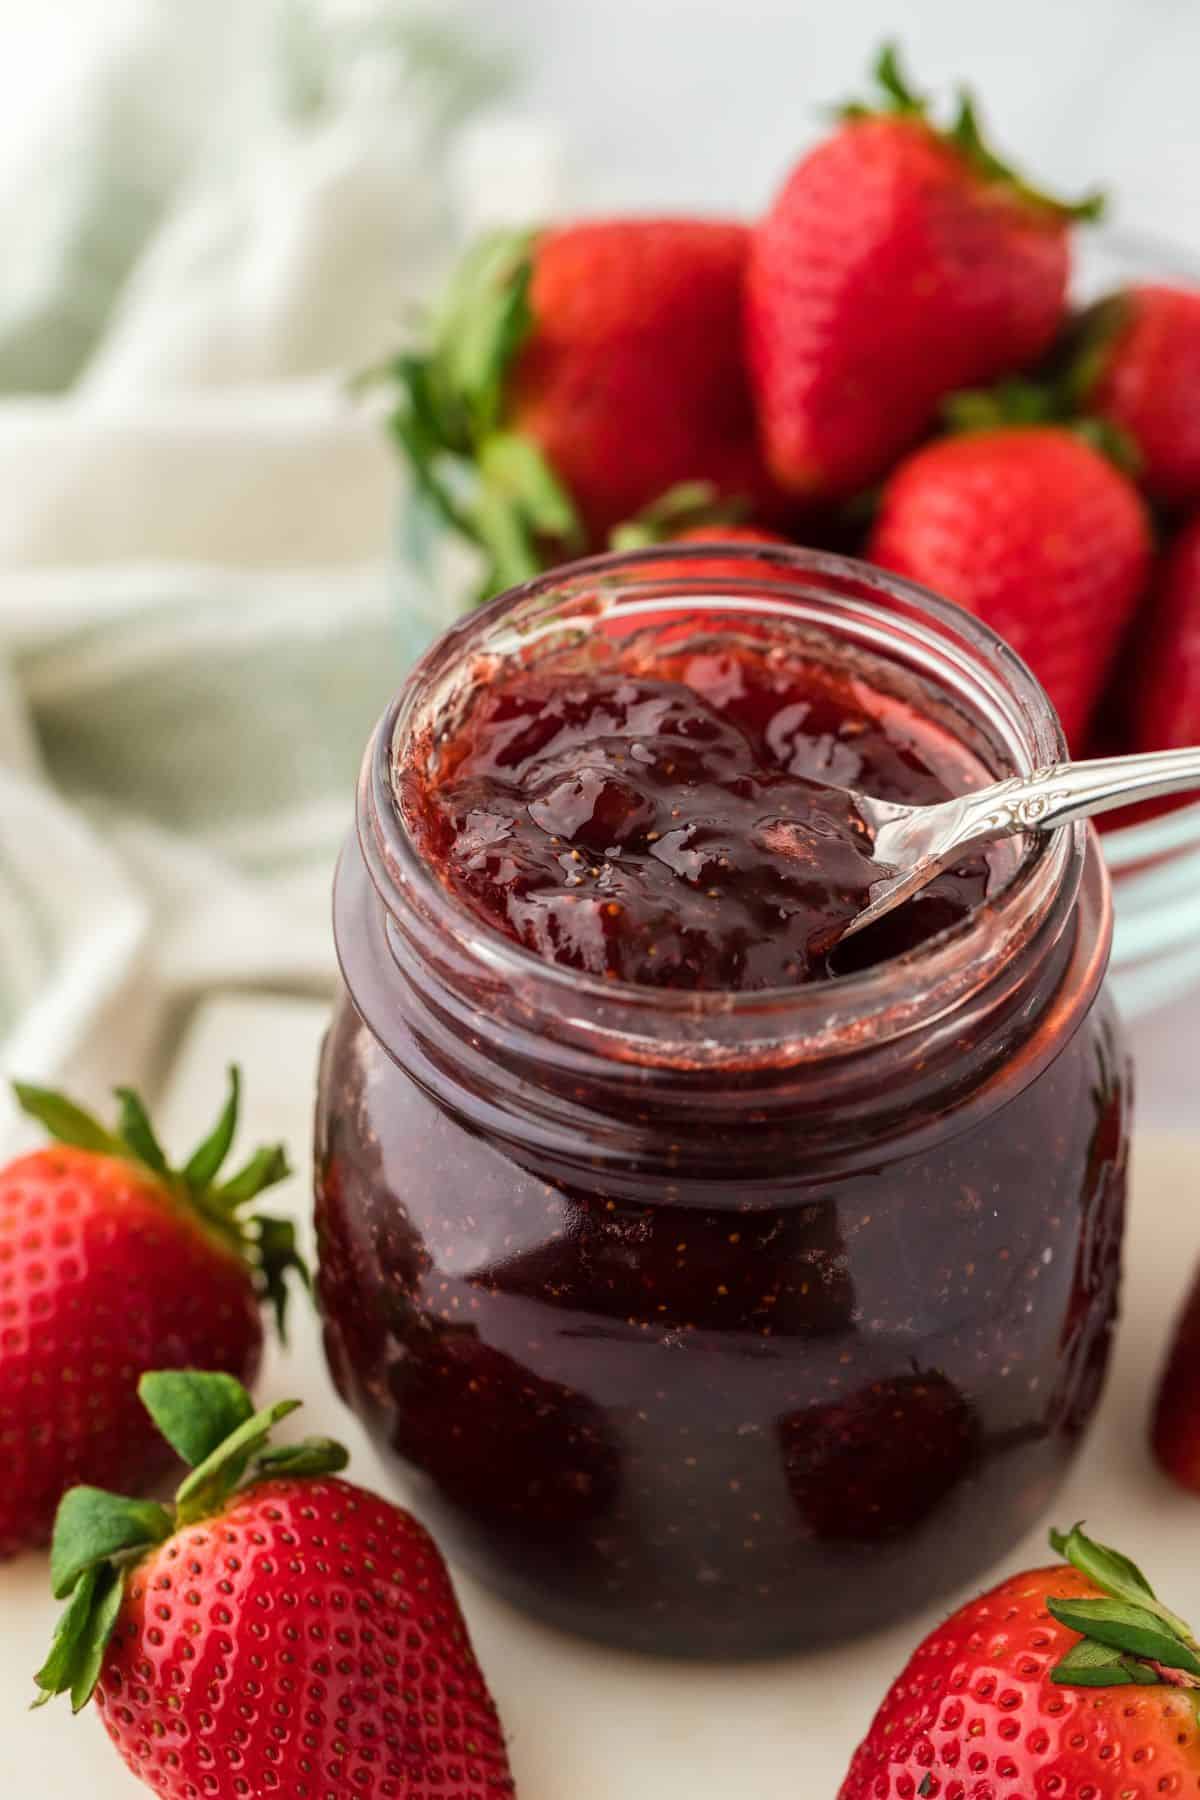 A spoonful of rich strawberry preserves is being lifted from a glass jar, with whole ripe strawberries and a bowl of strawberries in the background